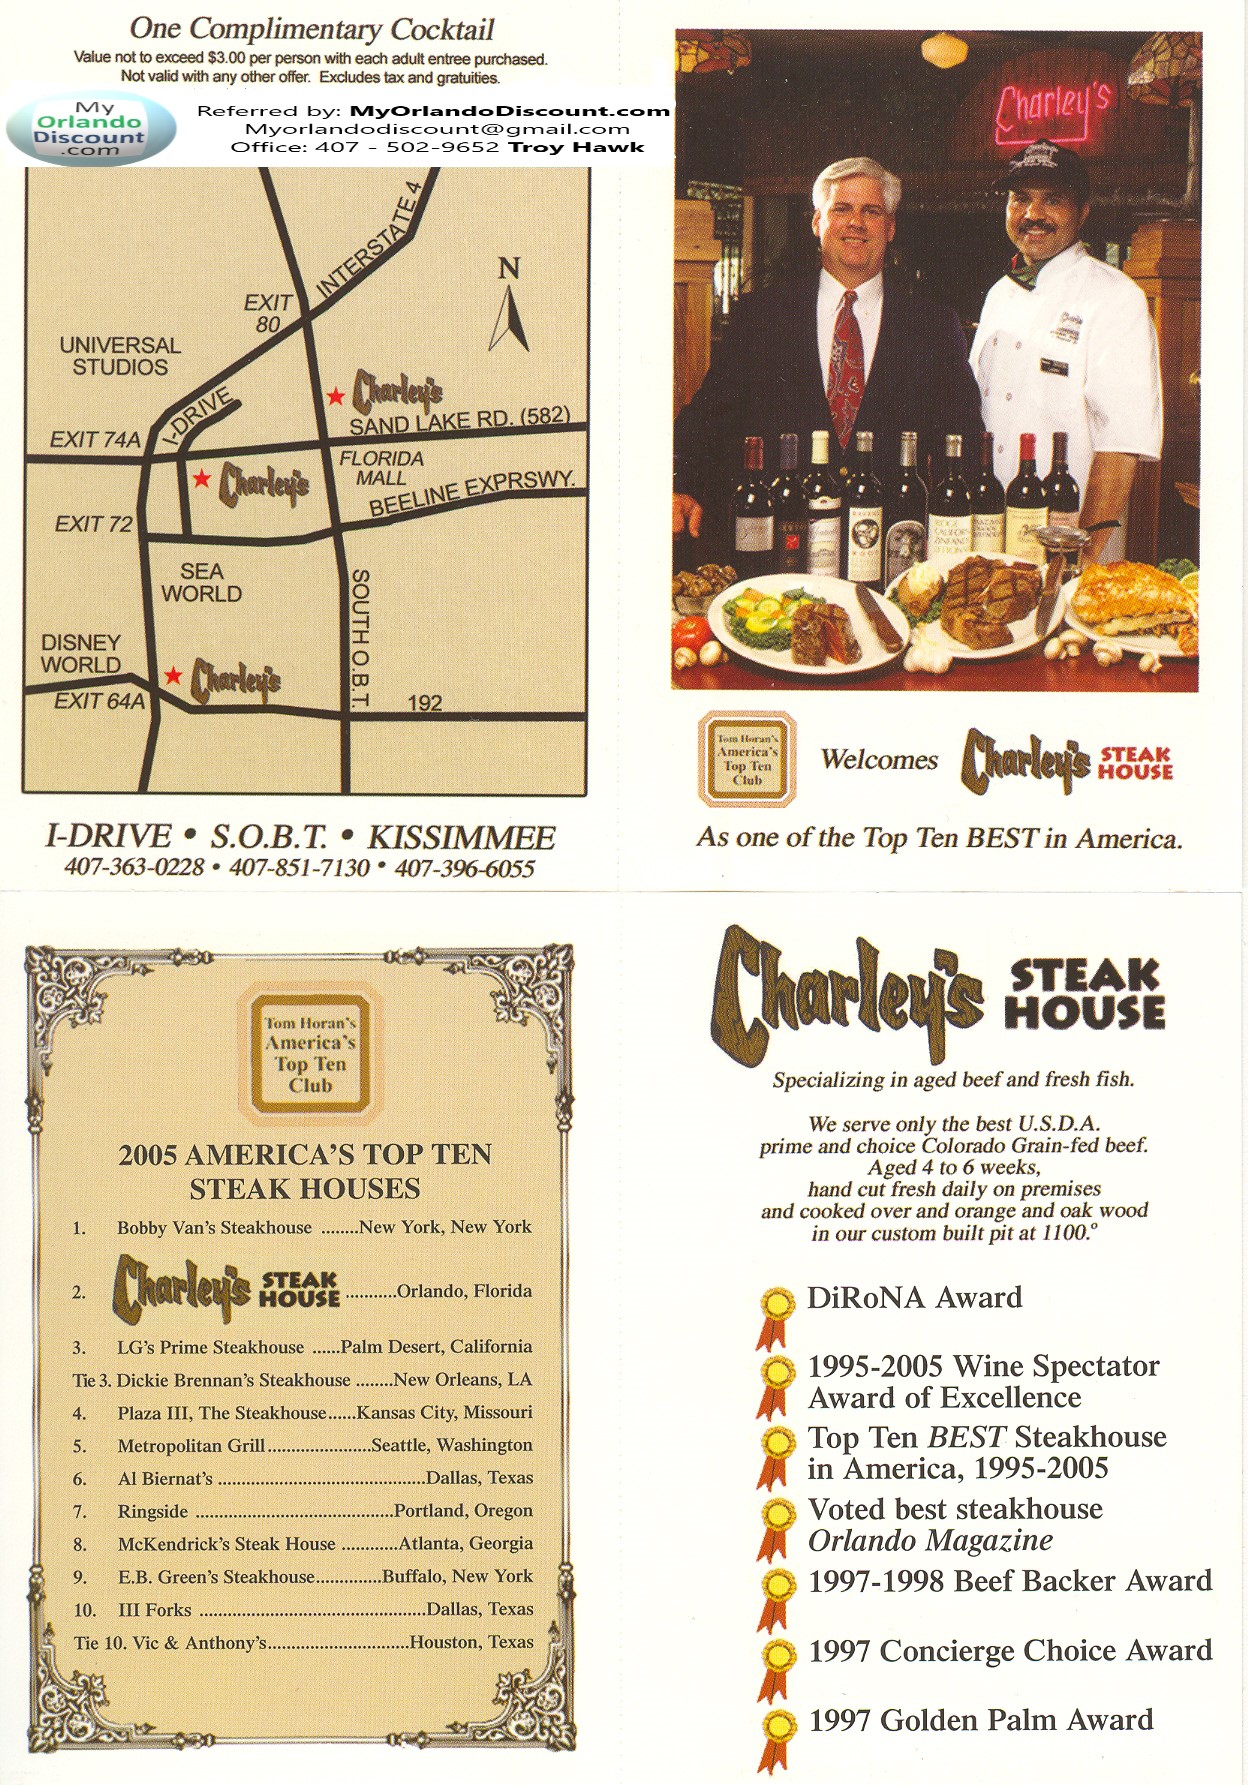 Coupon For Charley's Steak House in Orlando